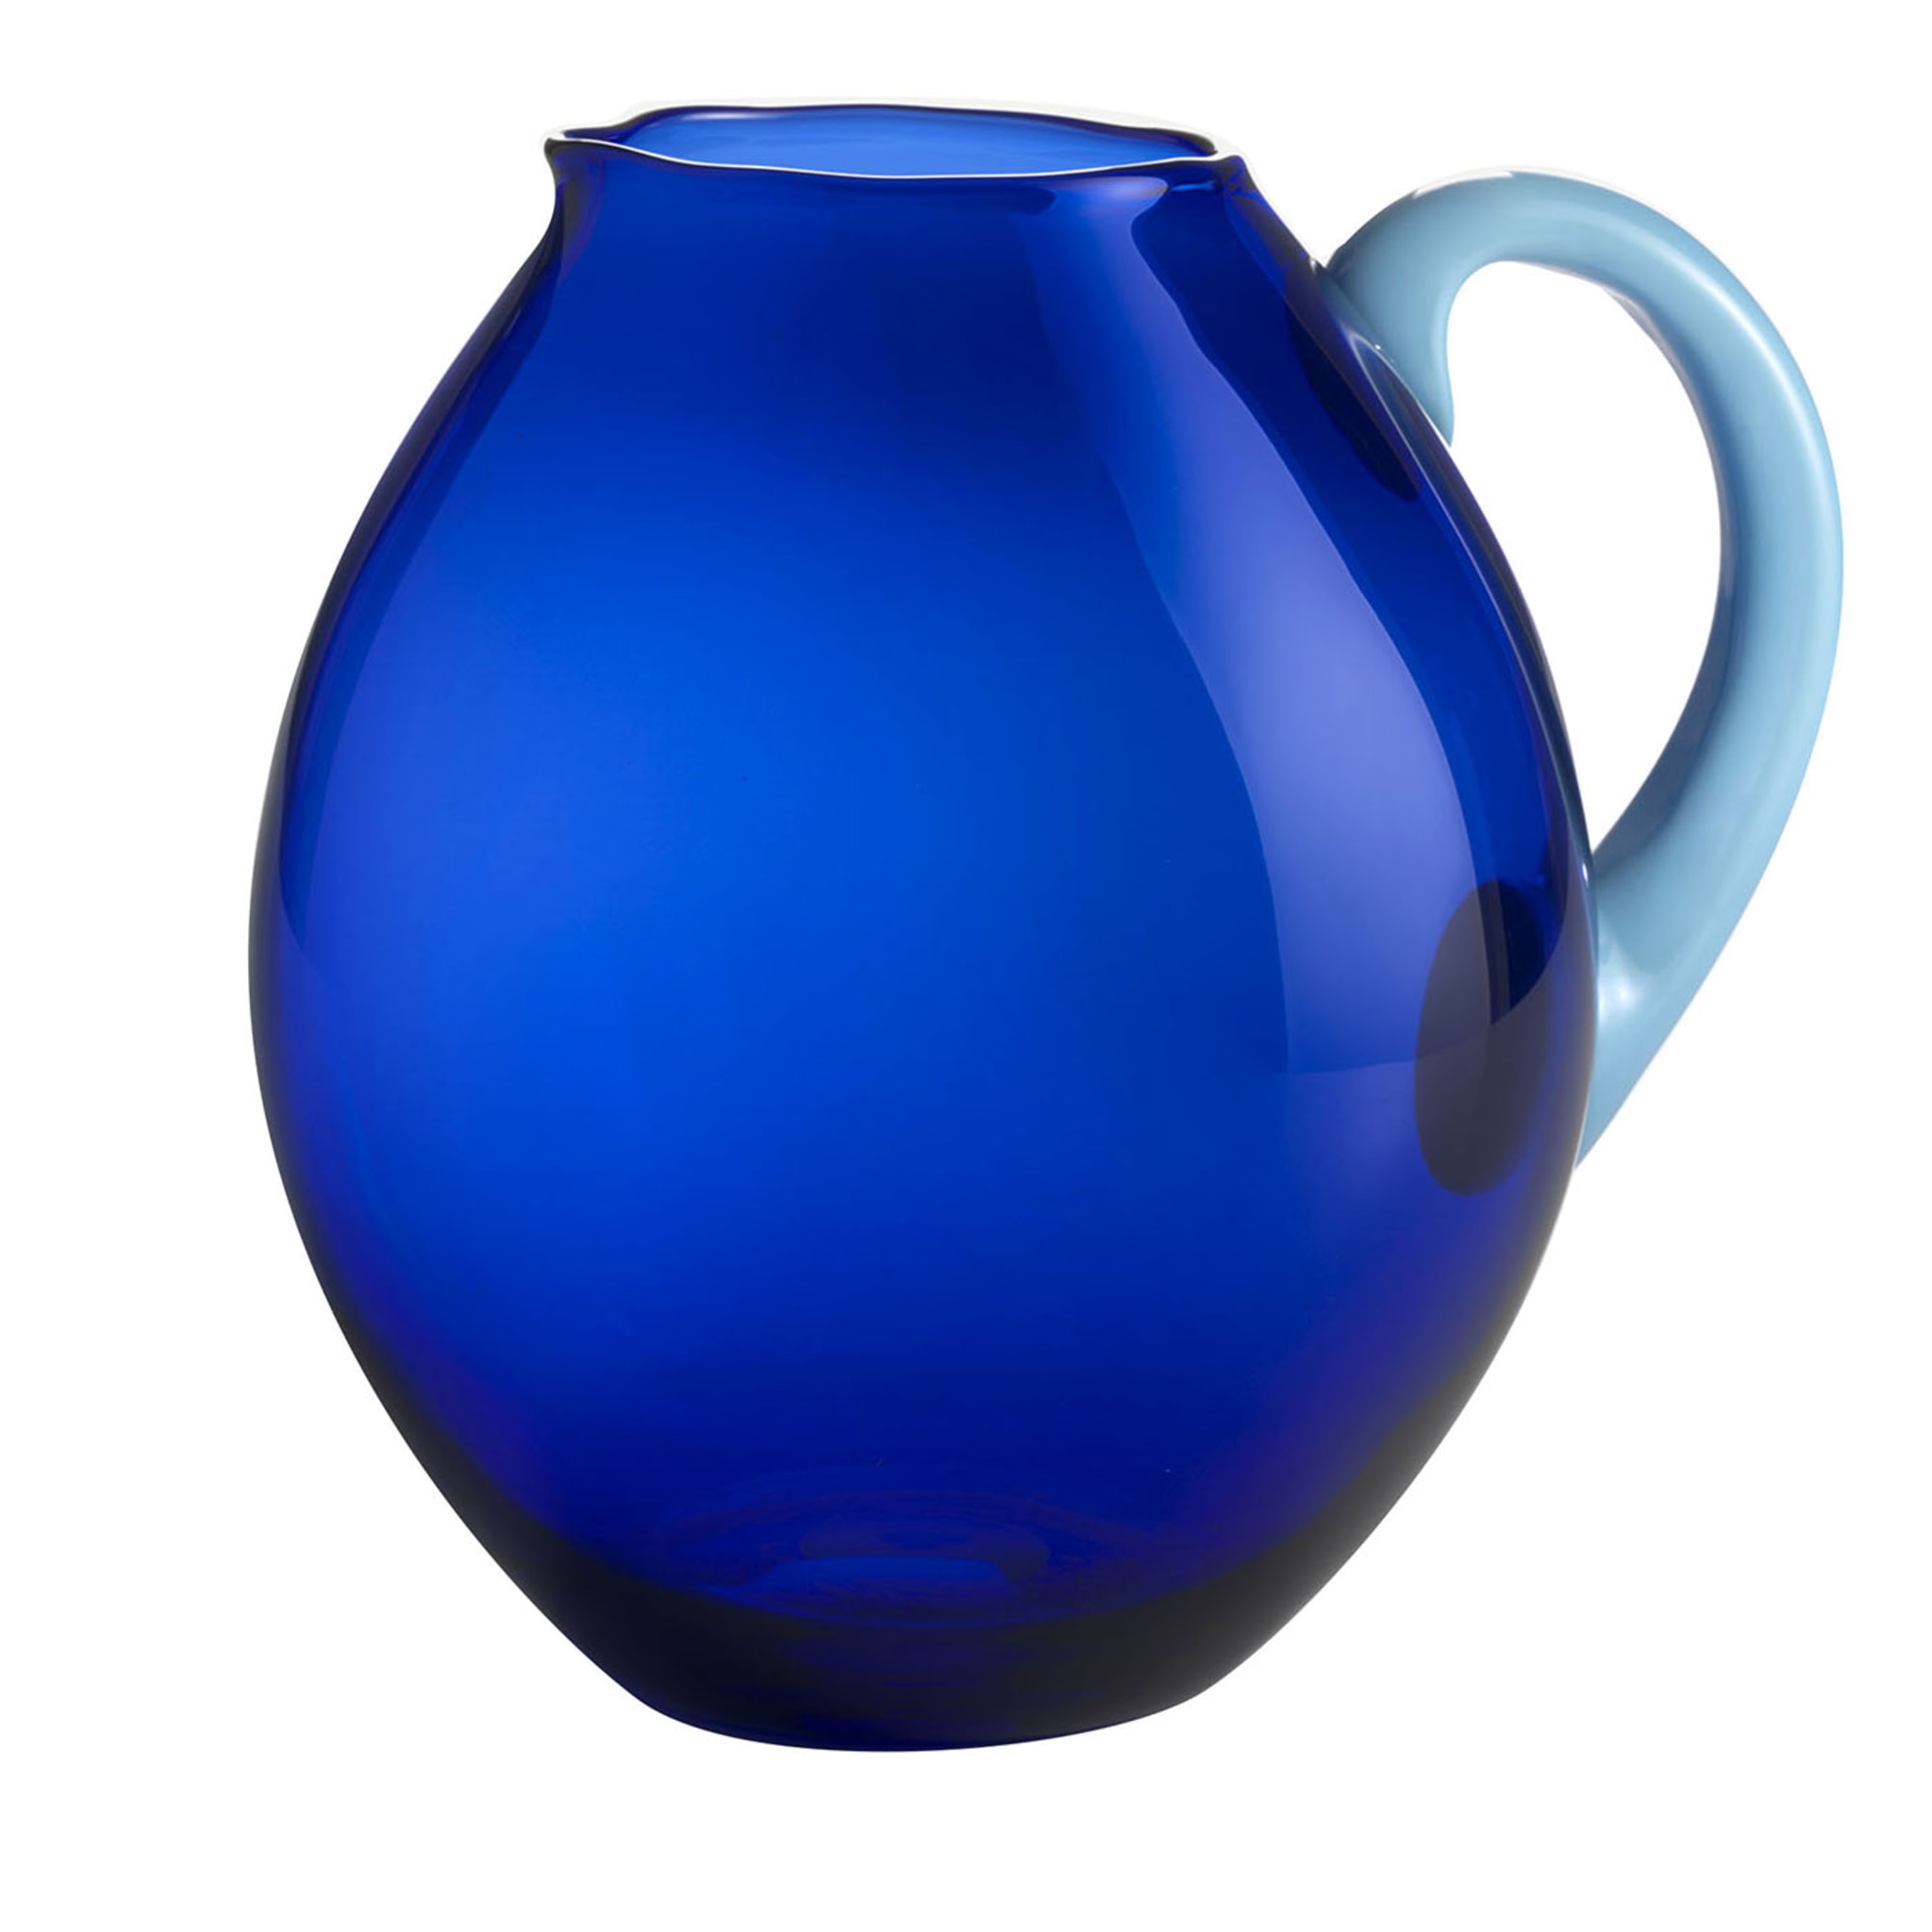 Dandy Blue & Light-Blue Pitcher by Stefano Marcato - Main view